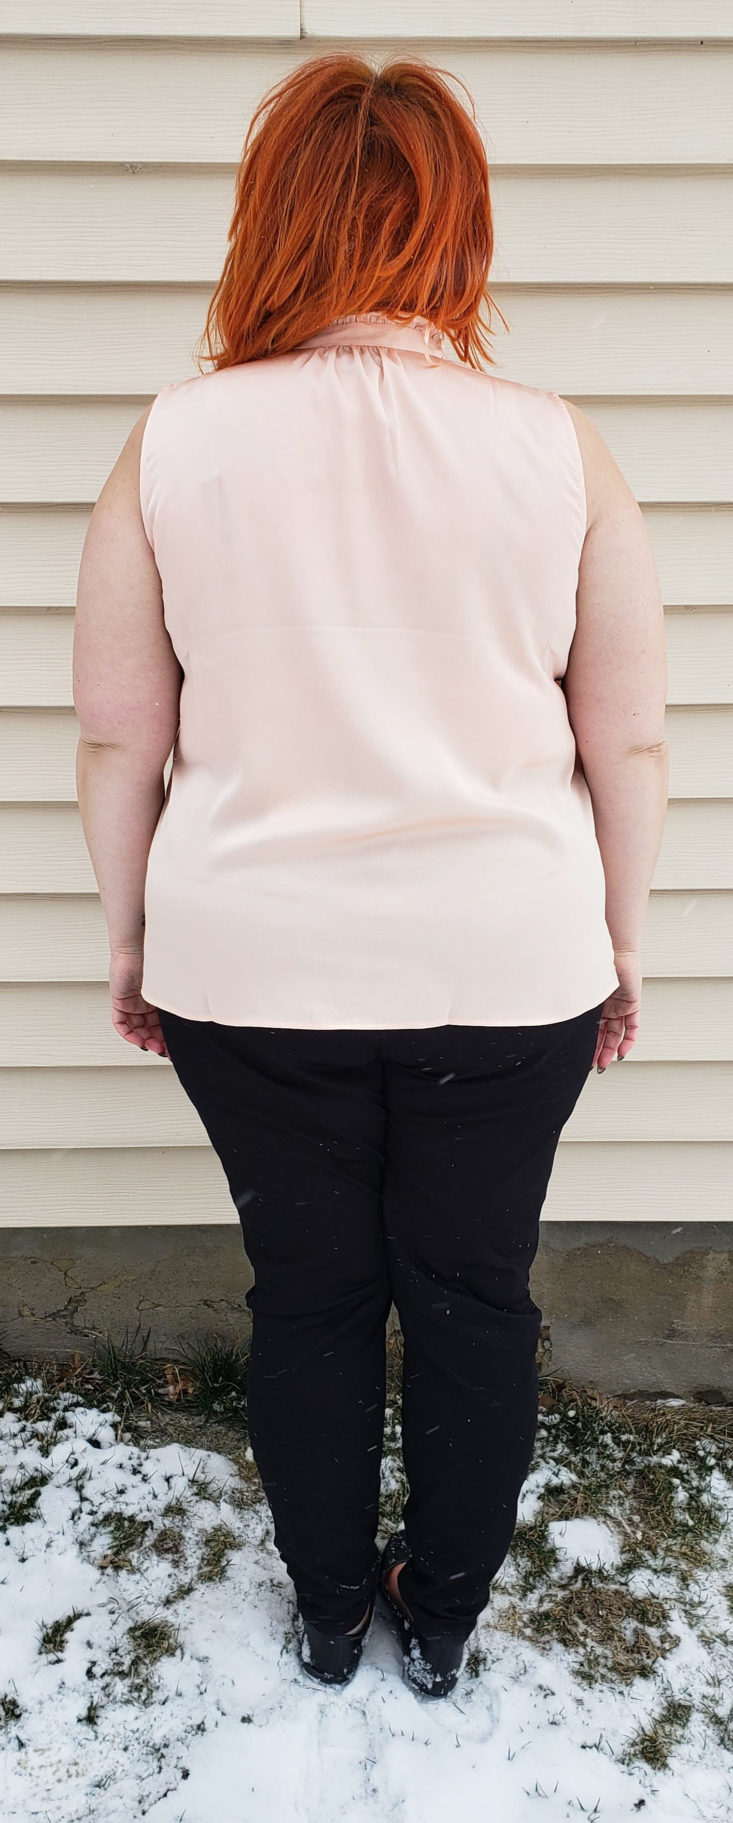 Trunk Club Plus Size Subscription Box Review March 2019 -Ruffled Tie Neck Blouse by CeCe 4 Back